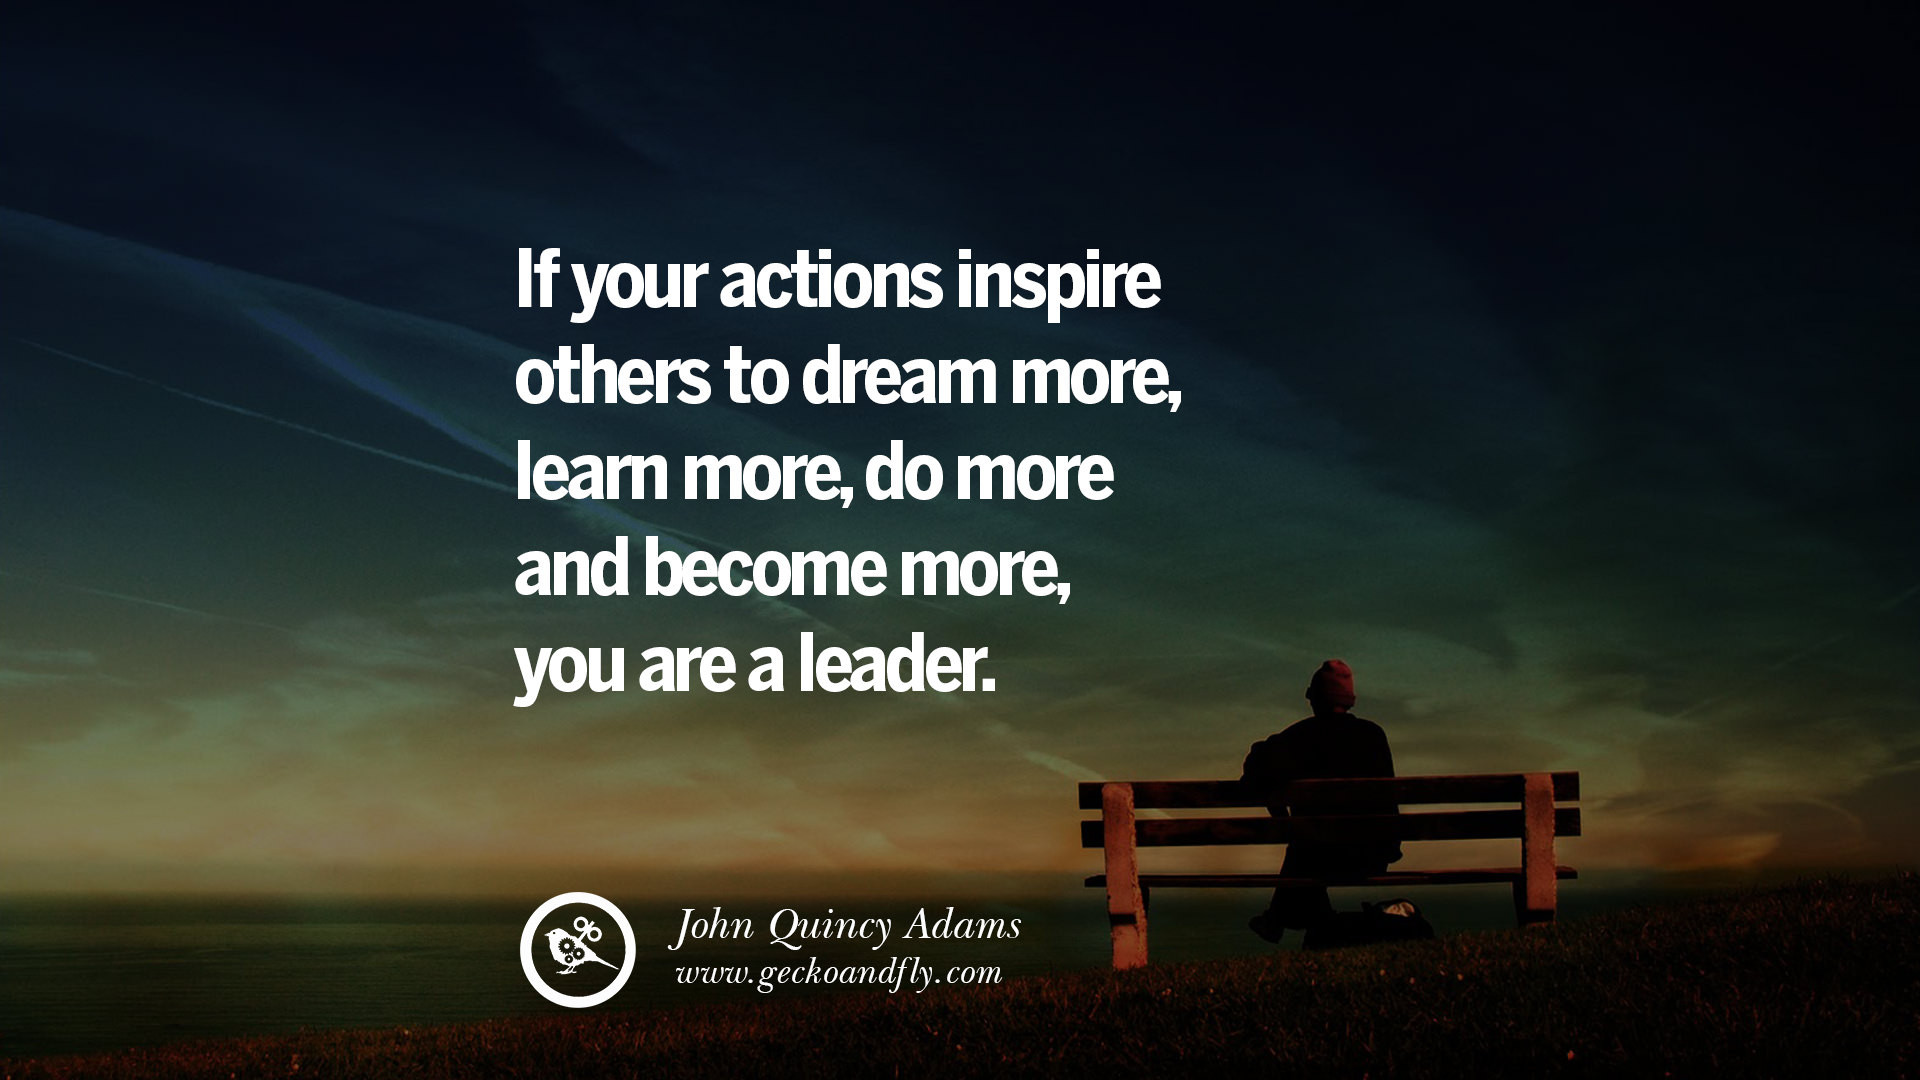 Leadership Motivational Quotes
 22 Uplifting and Motivational Quotes on Management Leadership